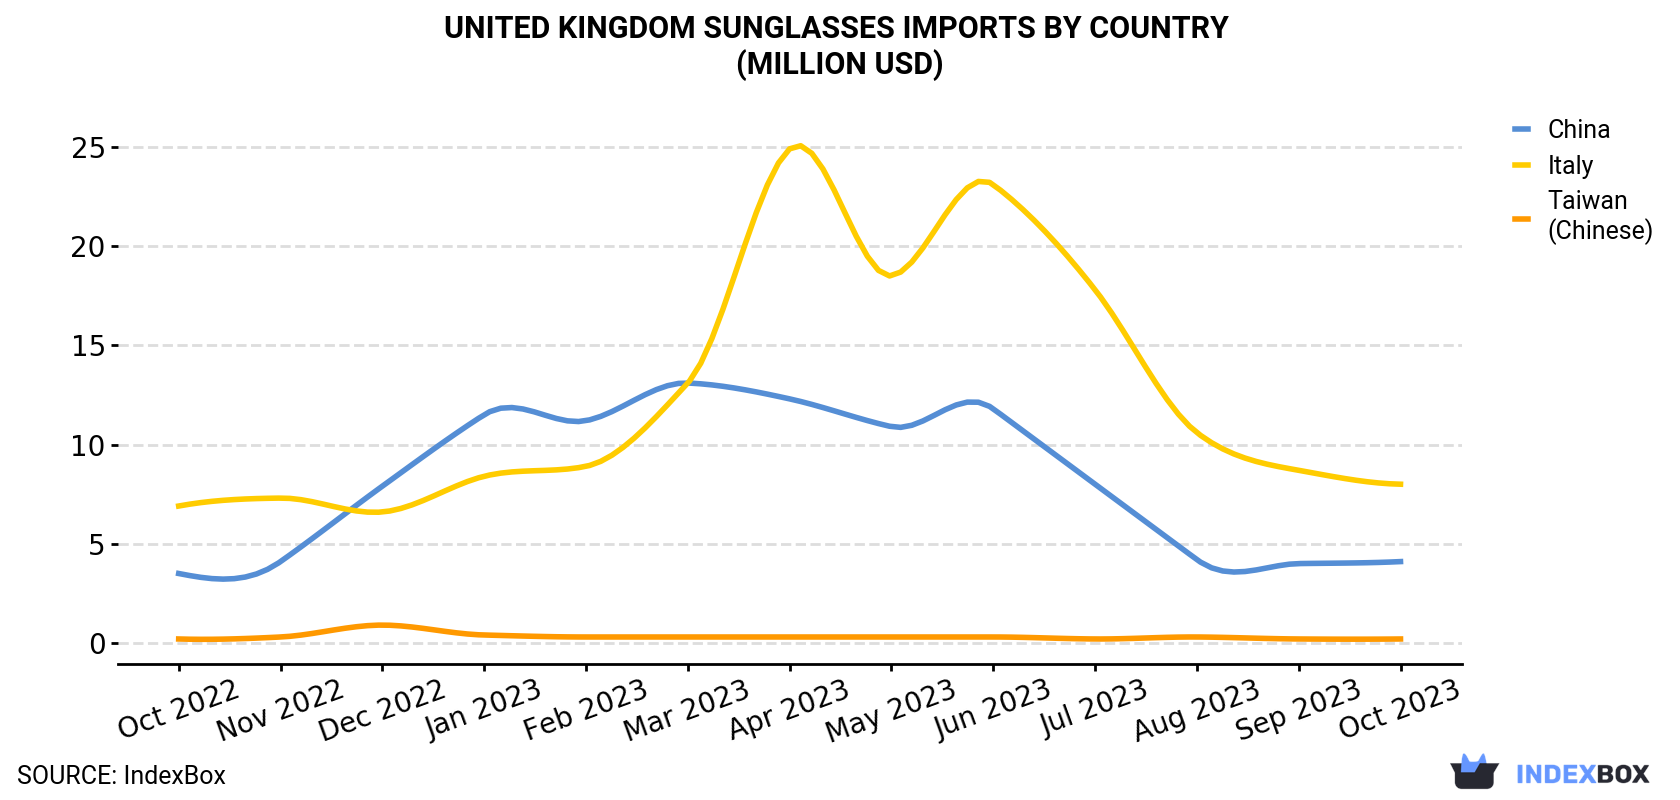 United Kingdom Sunglasses Imports By Country (Million USD)